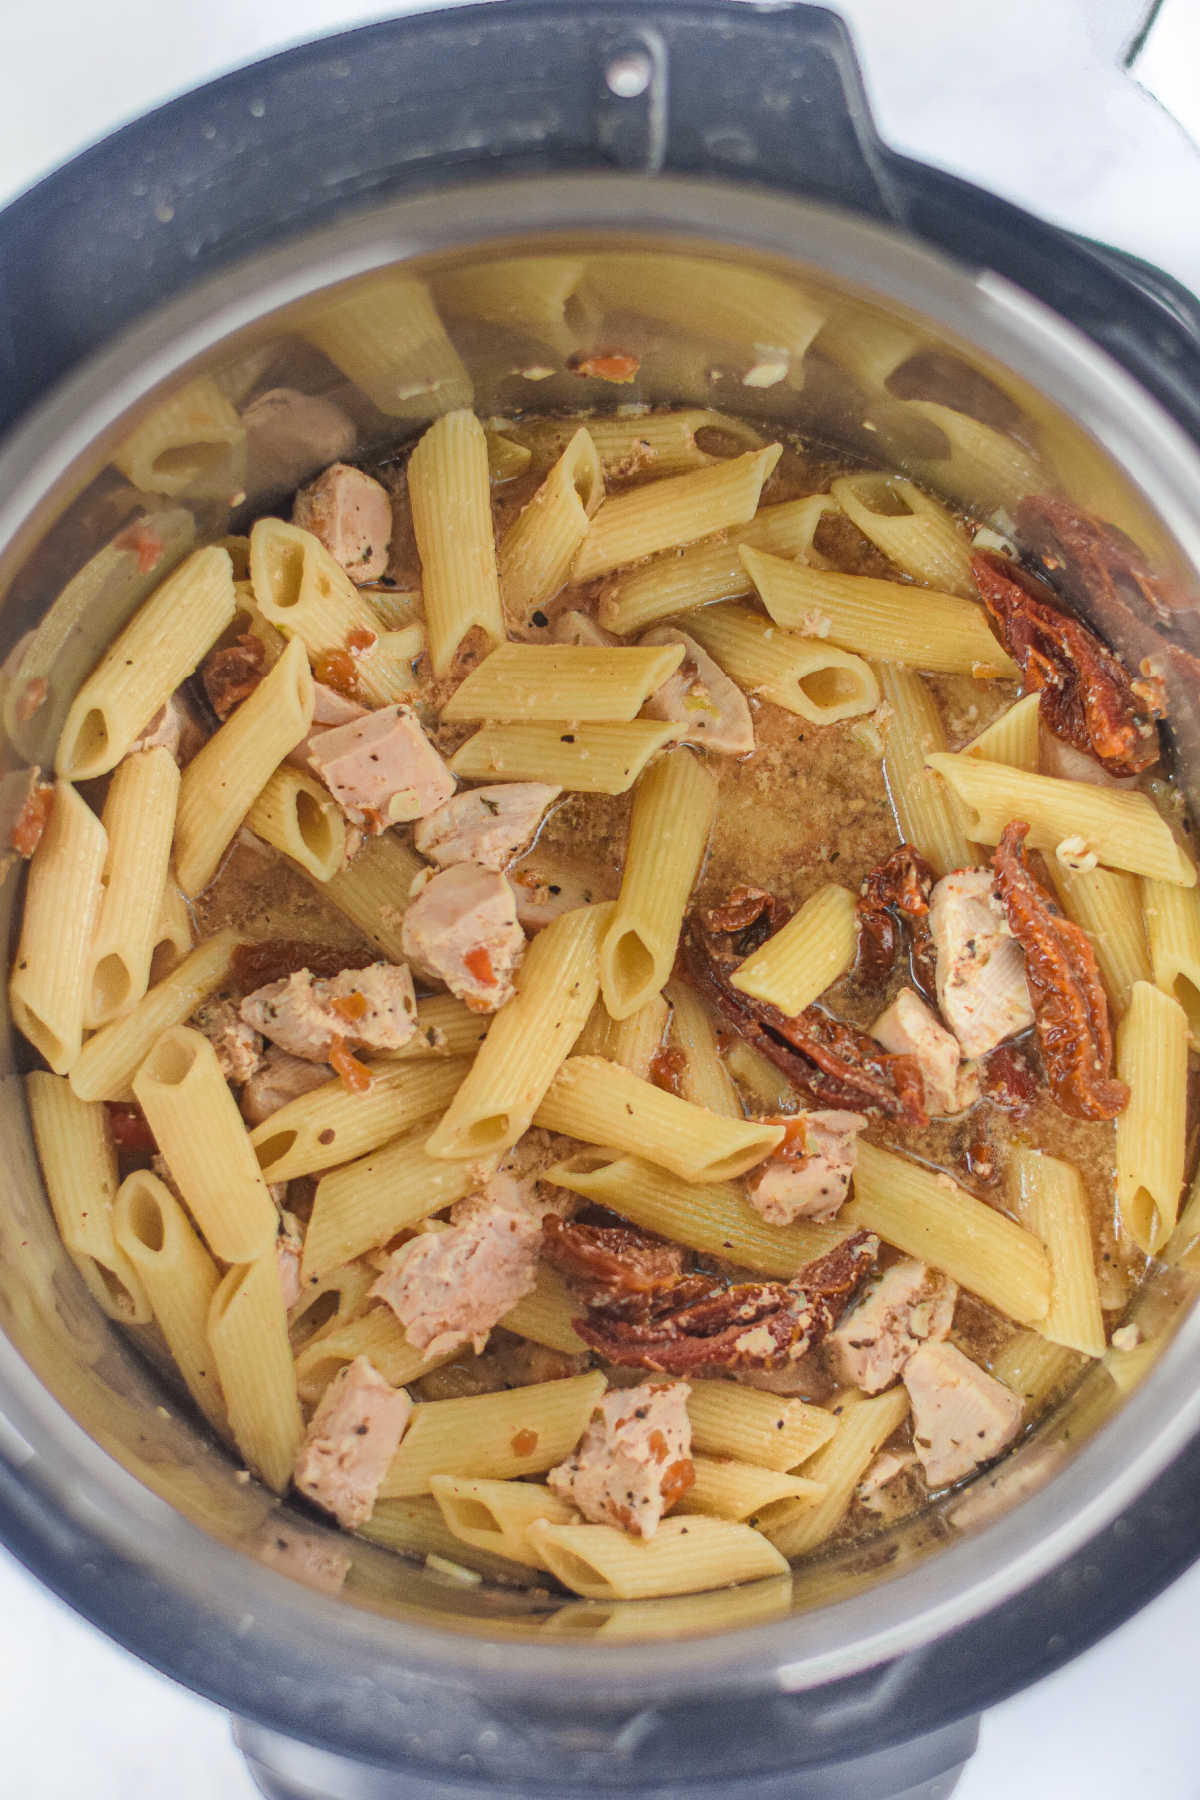 Cooked chicken and pasta mixture in instant pot.